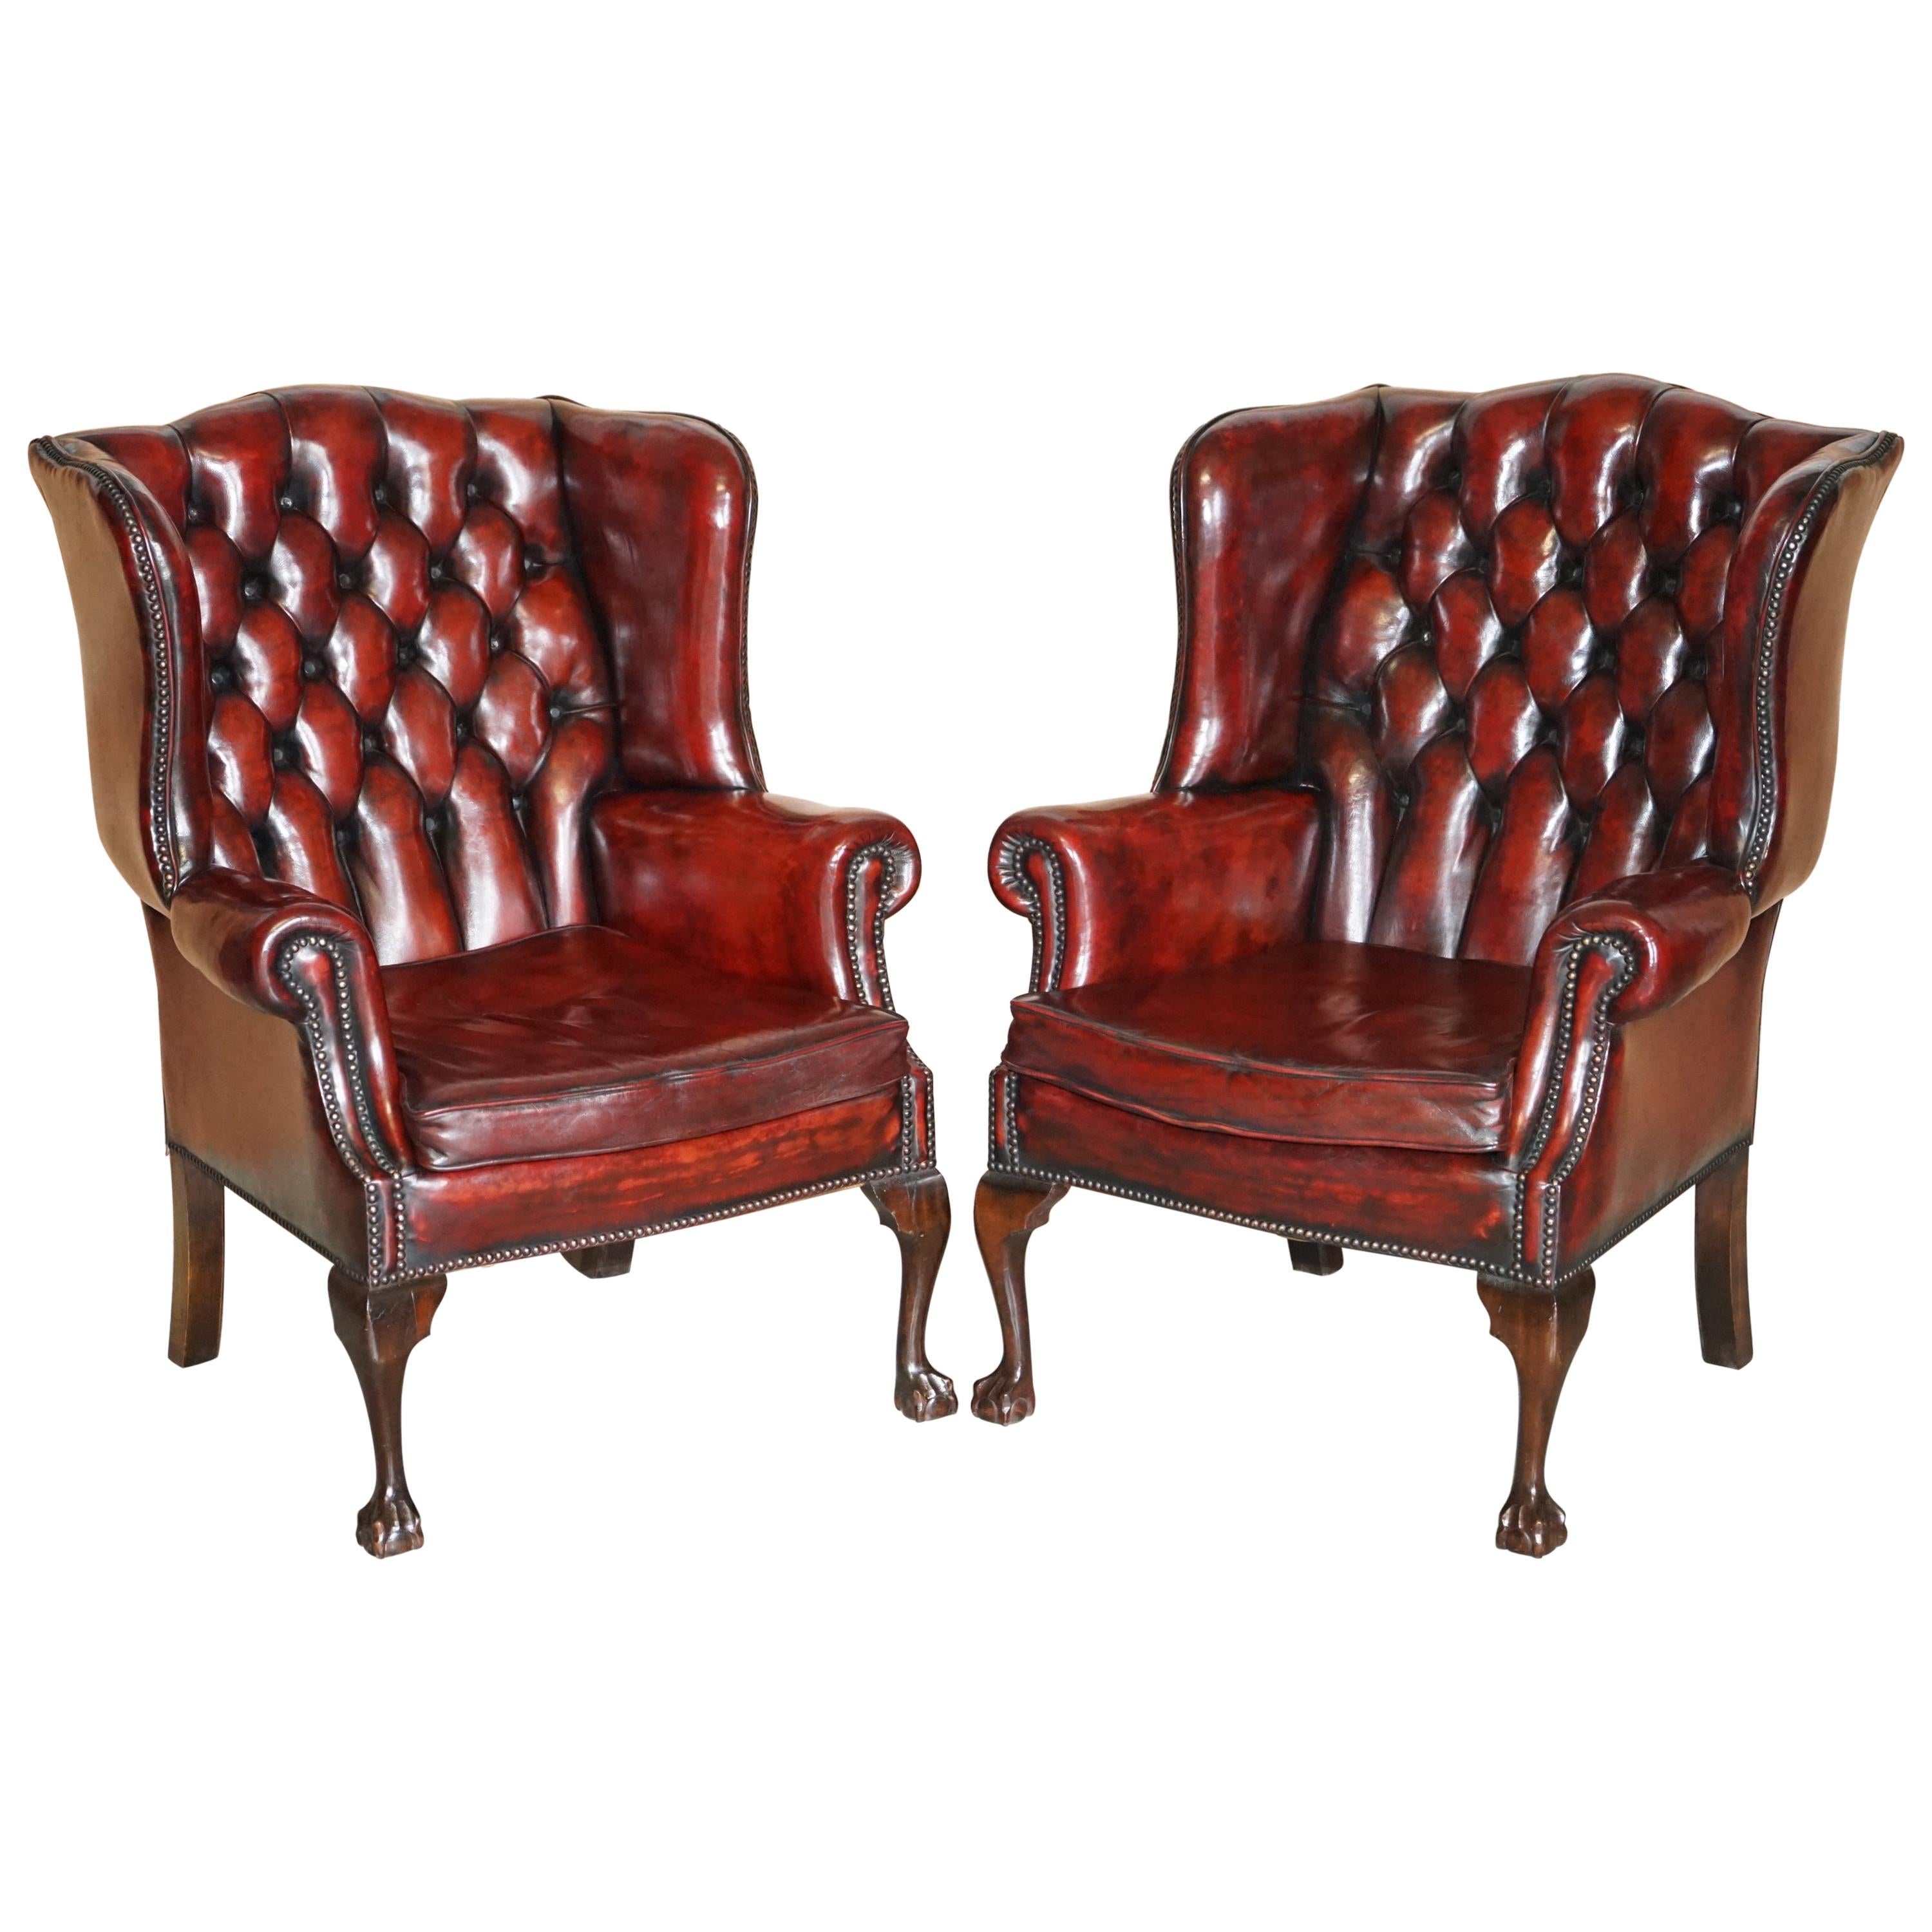 Pair of Restored Claw & Ball Chesterfield Wingback Bordeaux Leather Armchairs